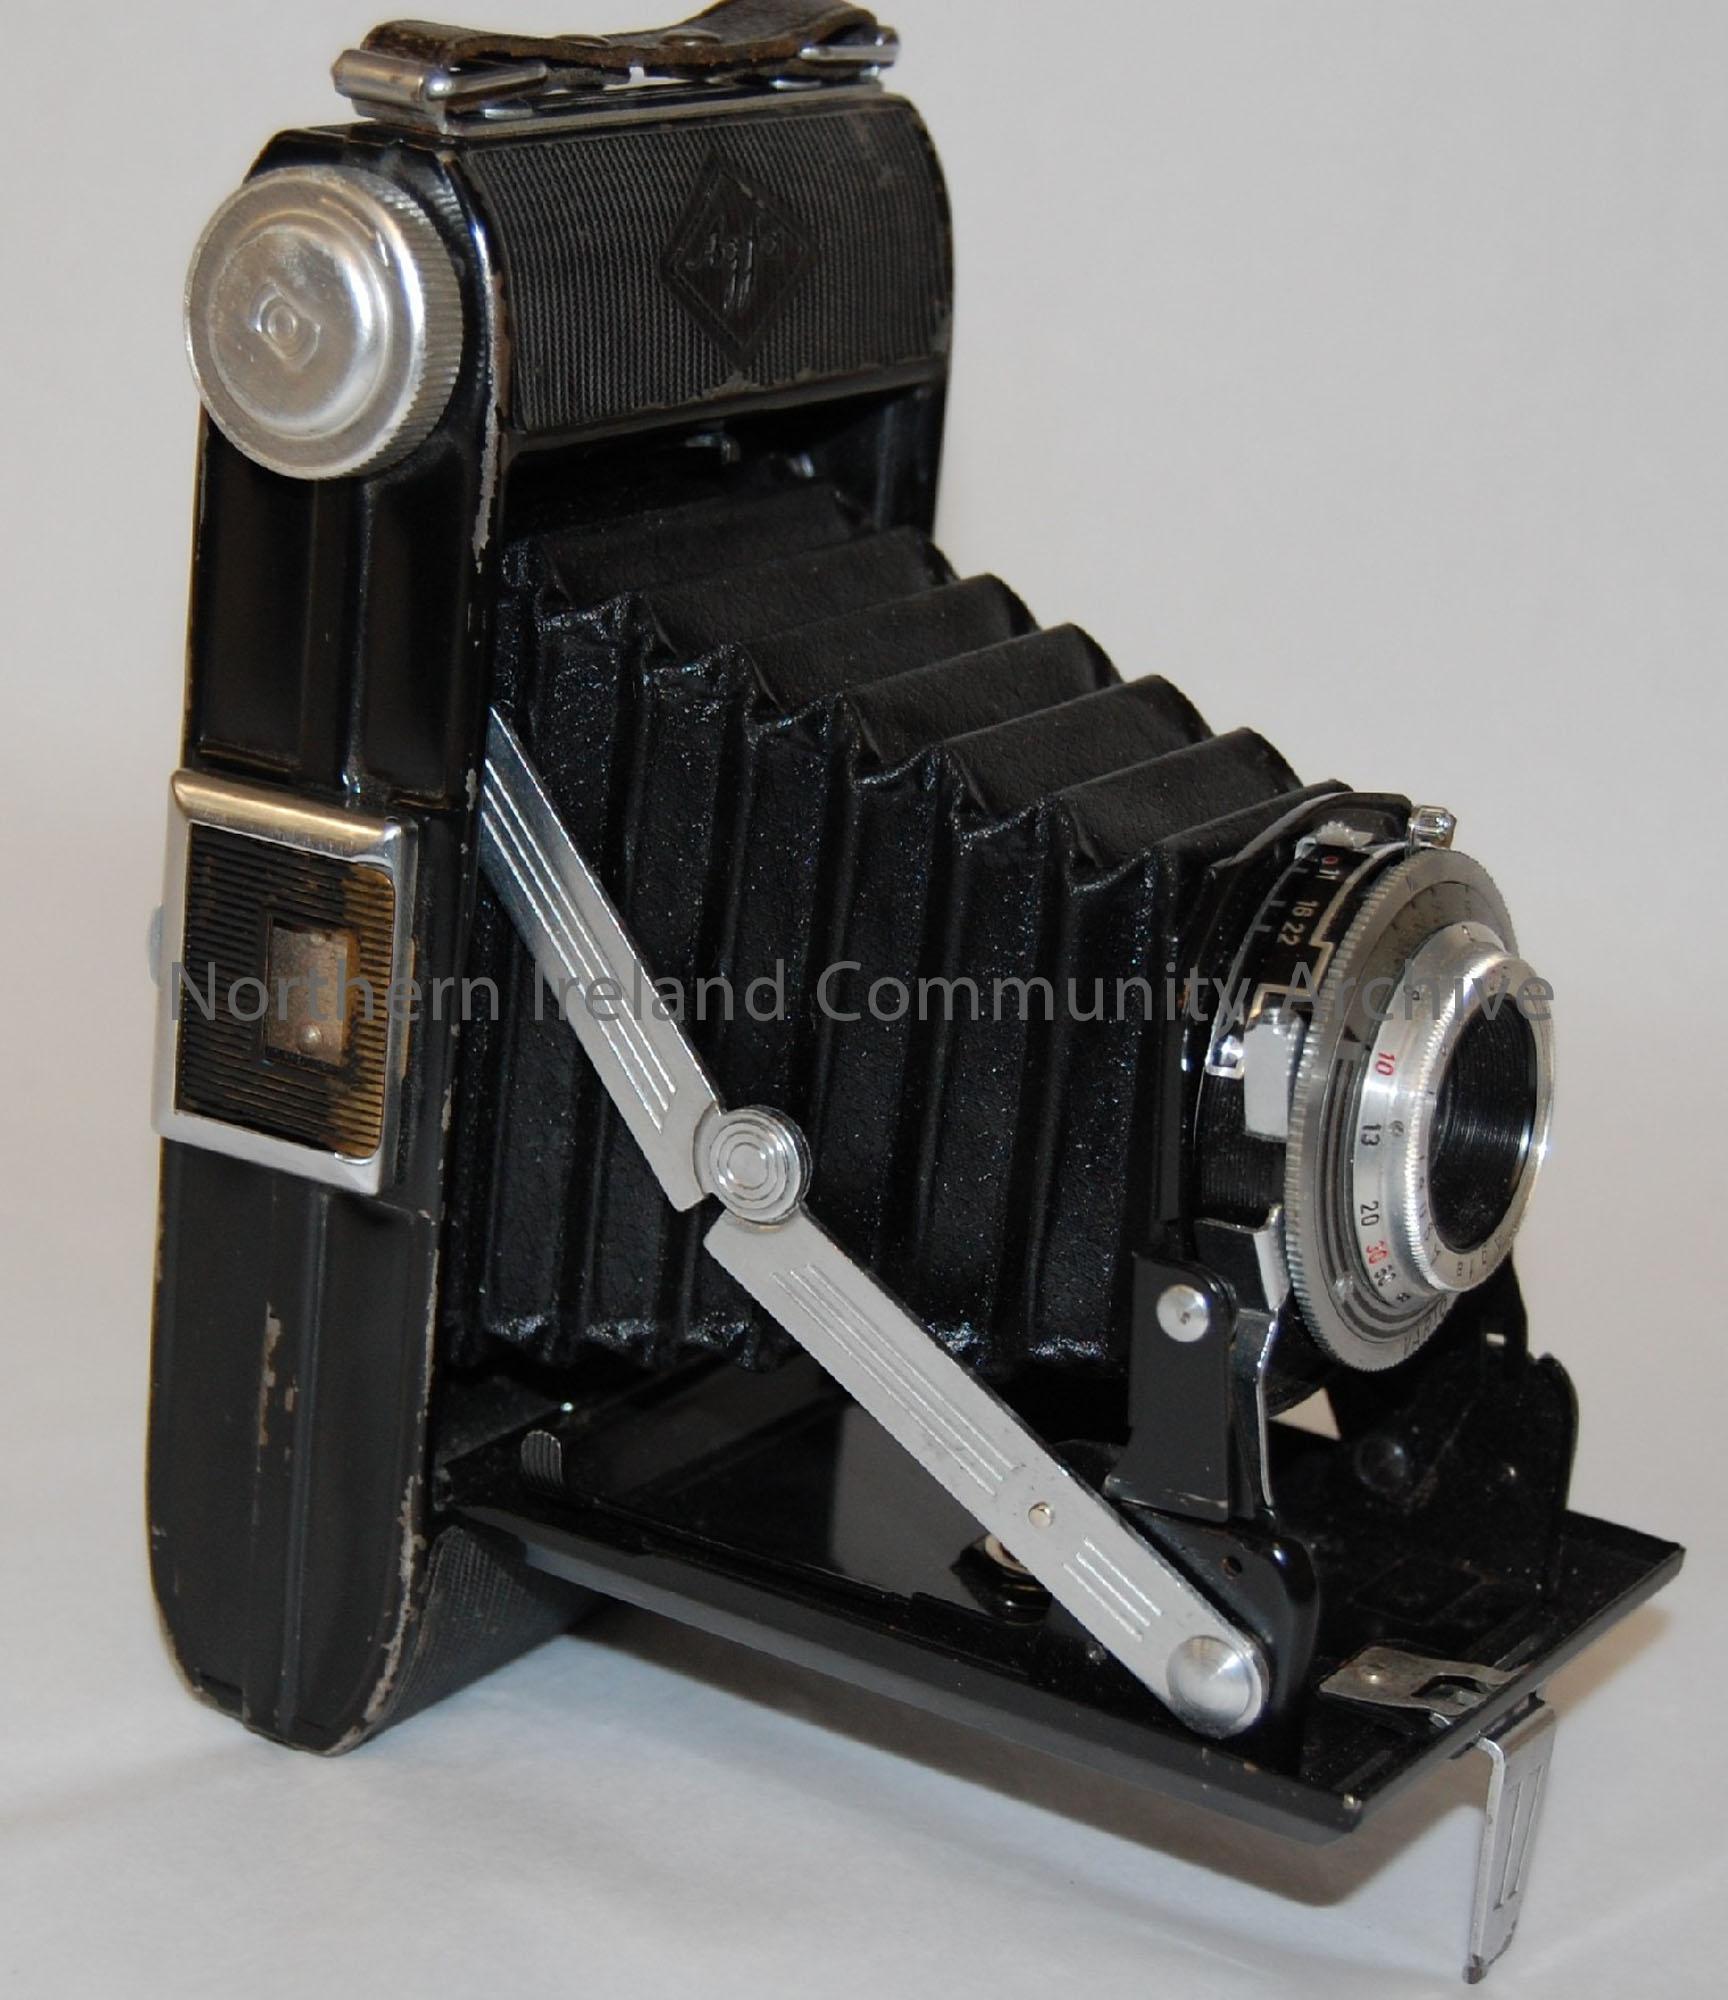 Agfa Billy camera with collapsible lense